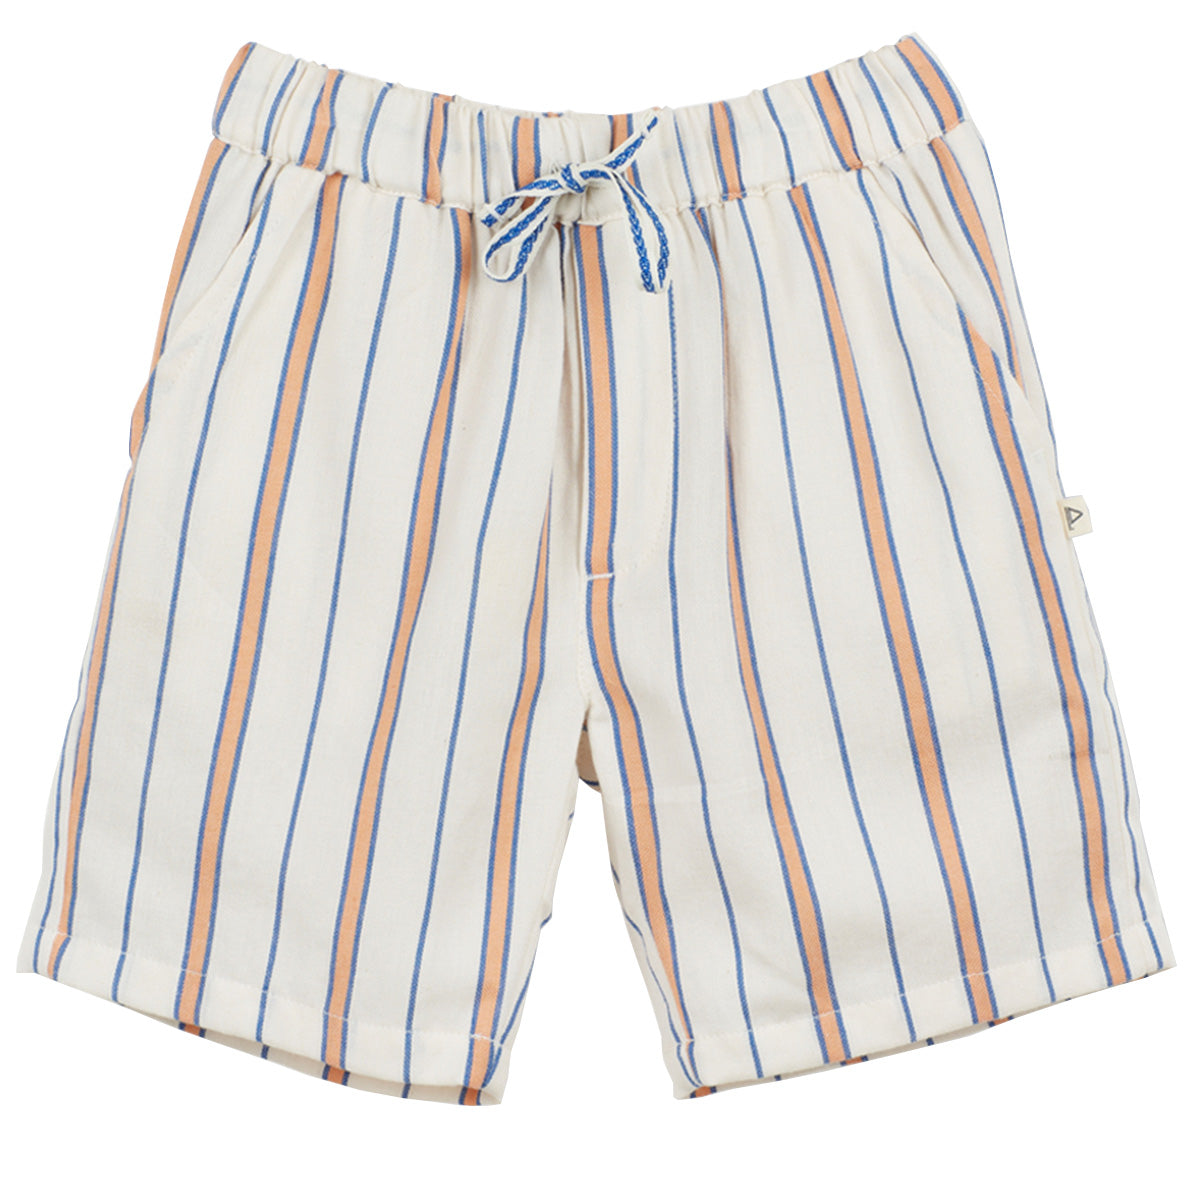 The Stripes Bermuda Shorts from Arsene et Les Pipelettes. Bermuda in striped fabric in green and beige tones